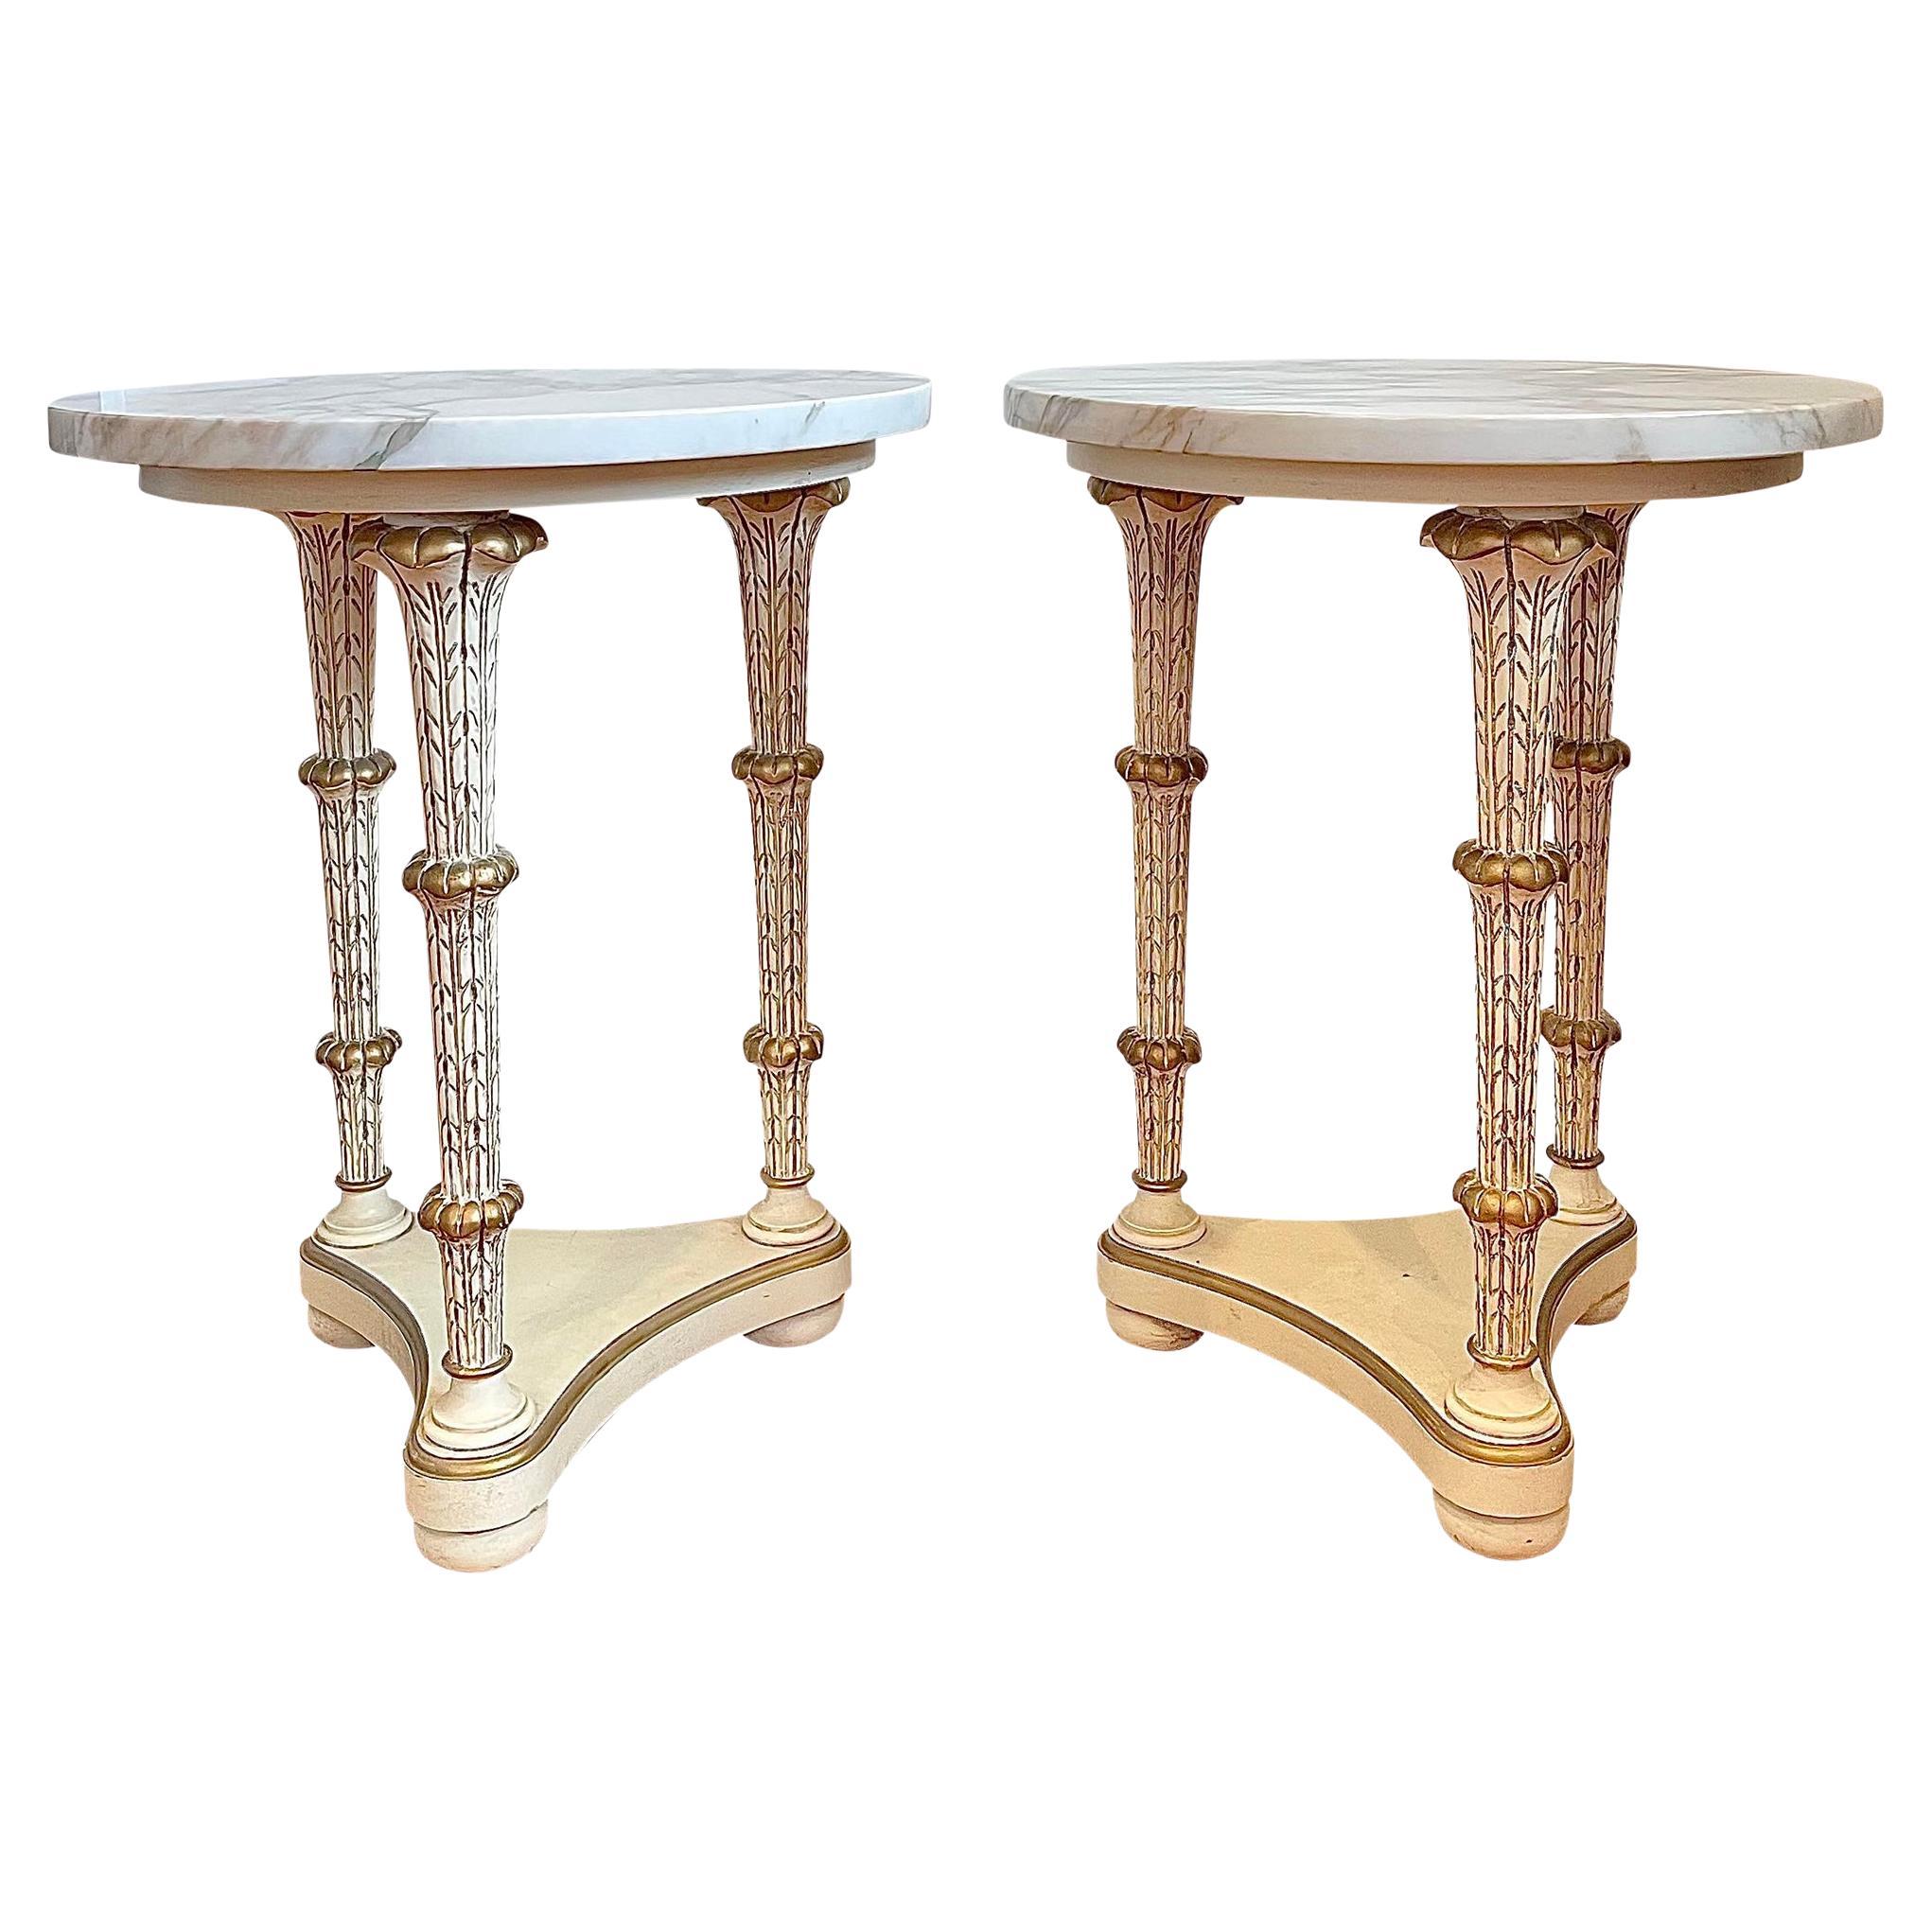 Mid 20th Century Neoclassical Style Marble Top Palm Frond Gueridon Tables